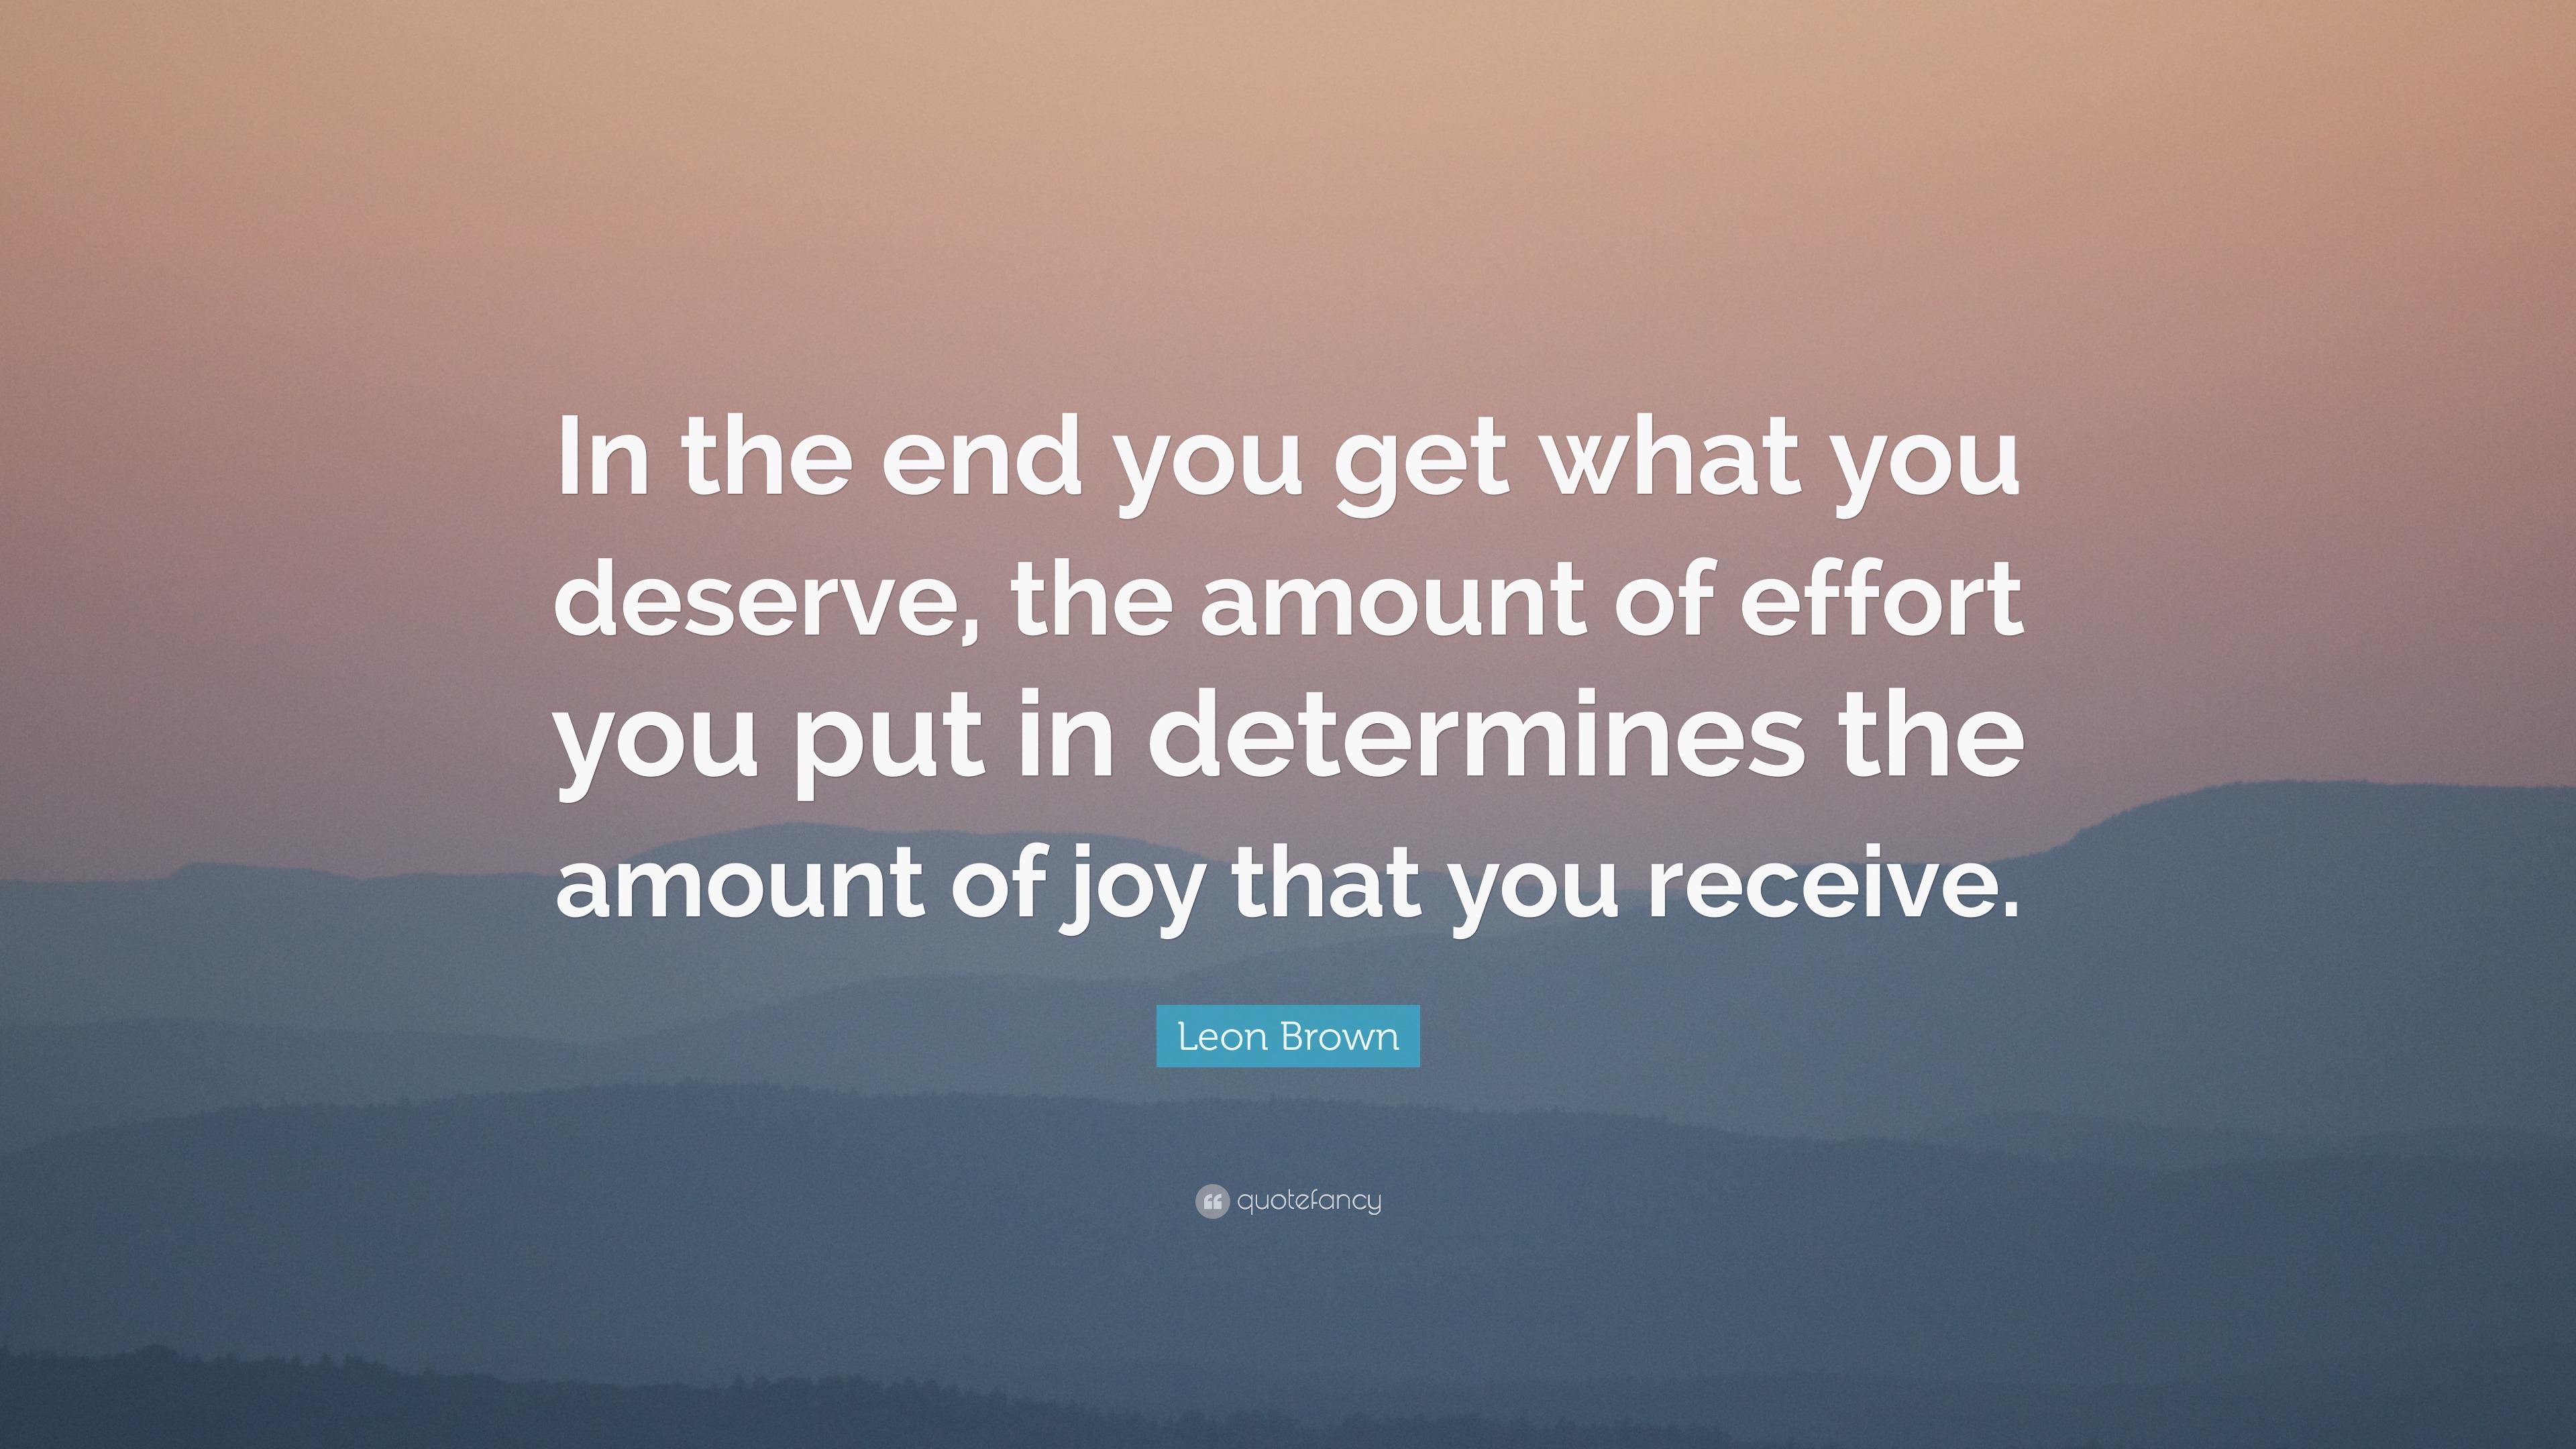 Leon Brown Quote: “In The End You Get What You Deserve, The Amount Of Effort You